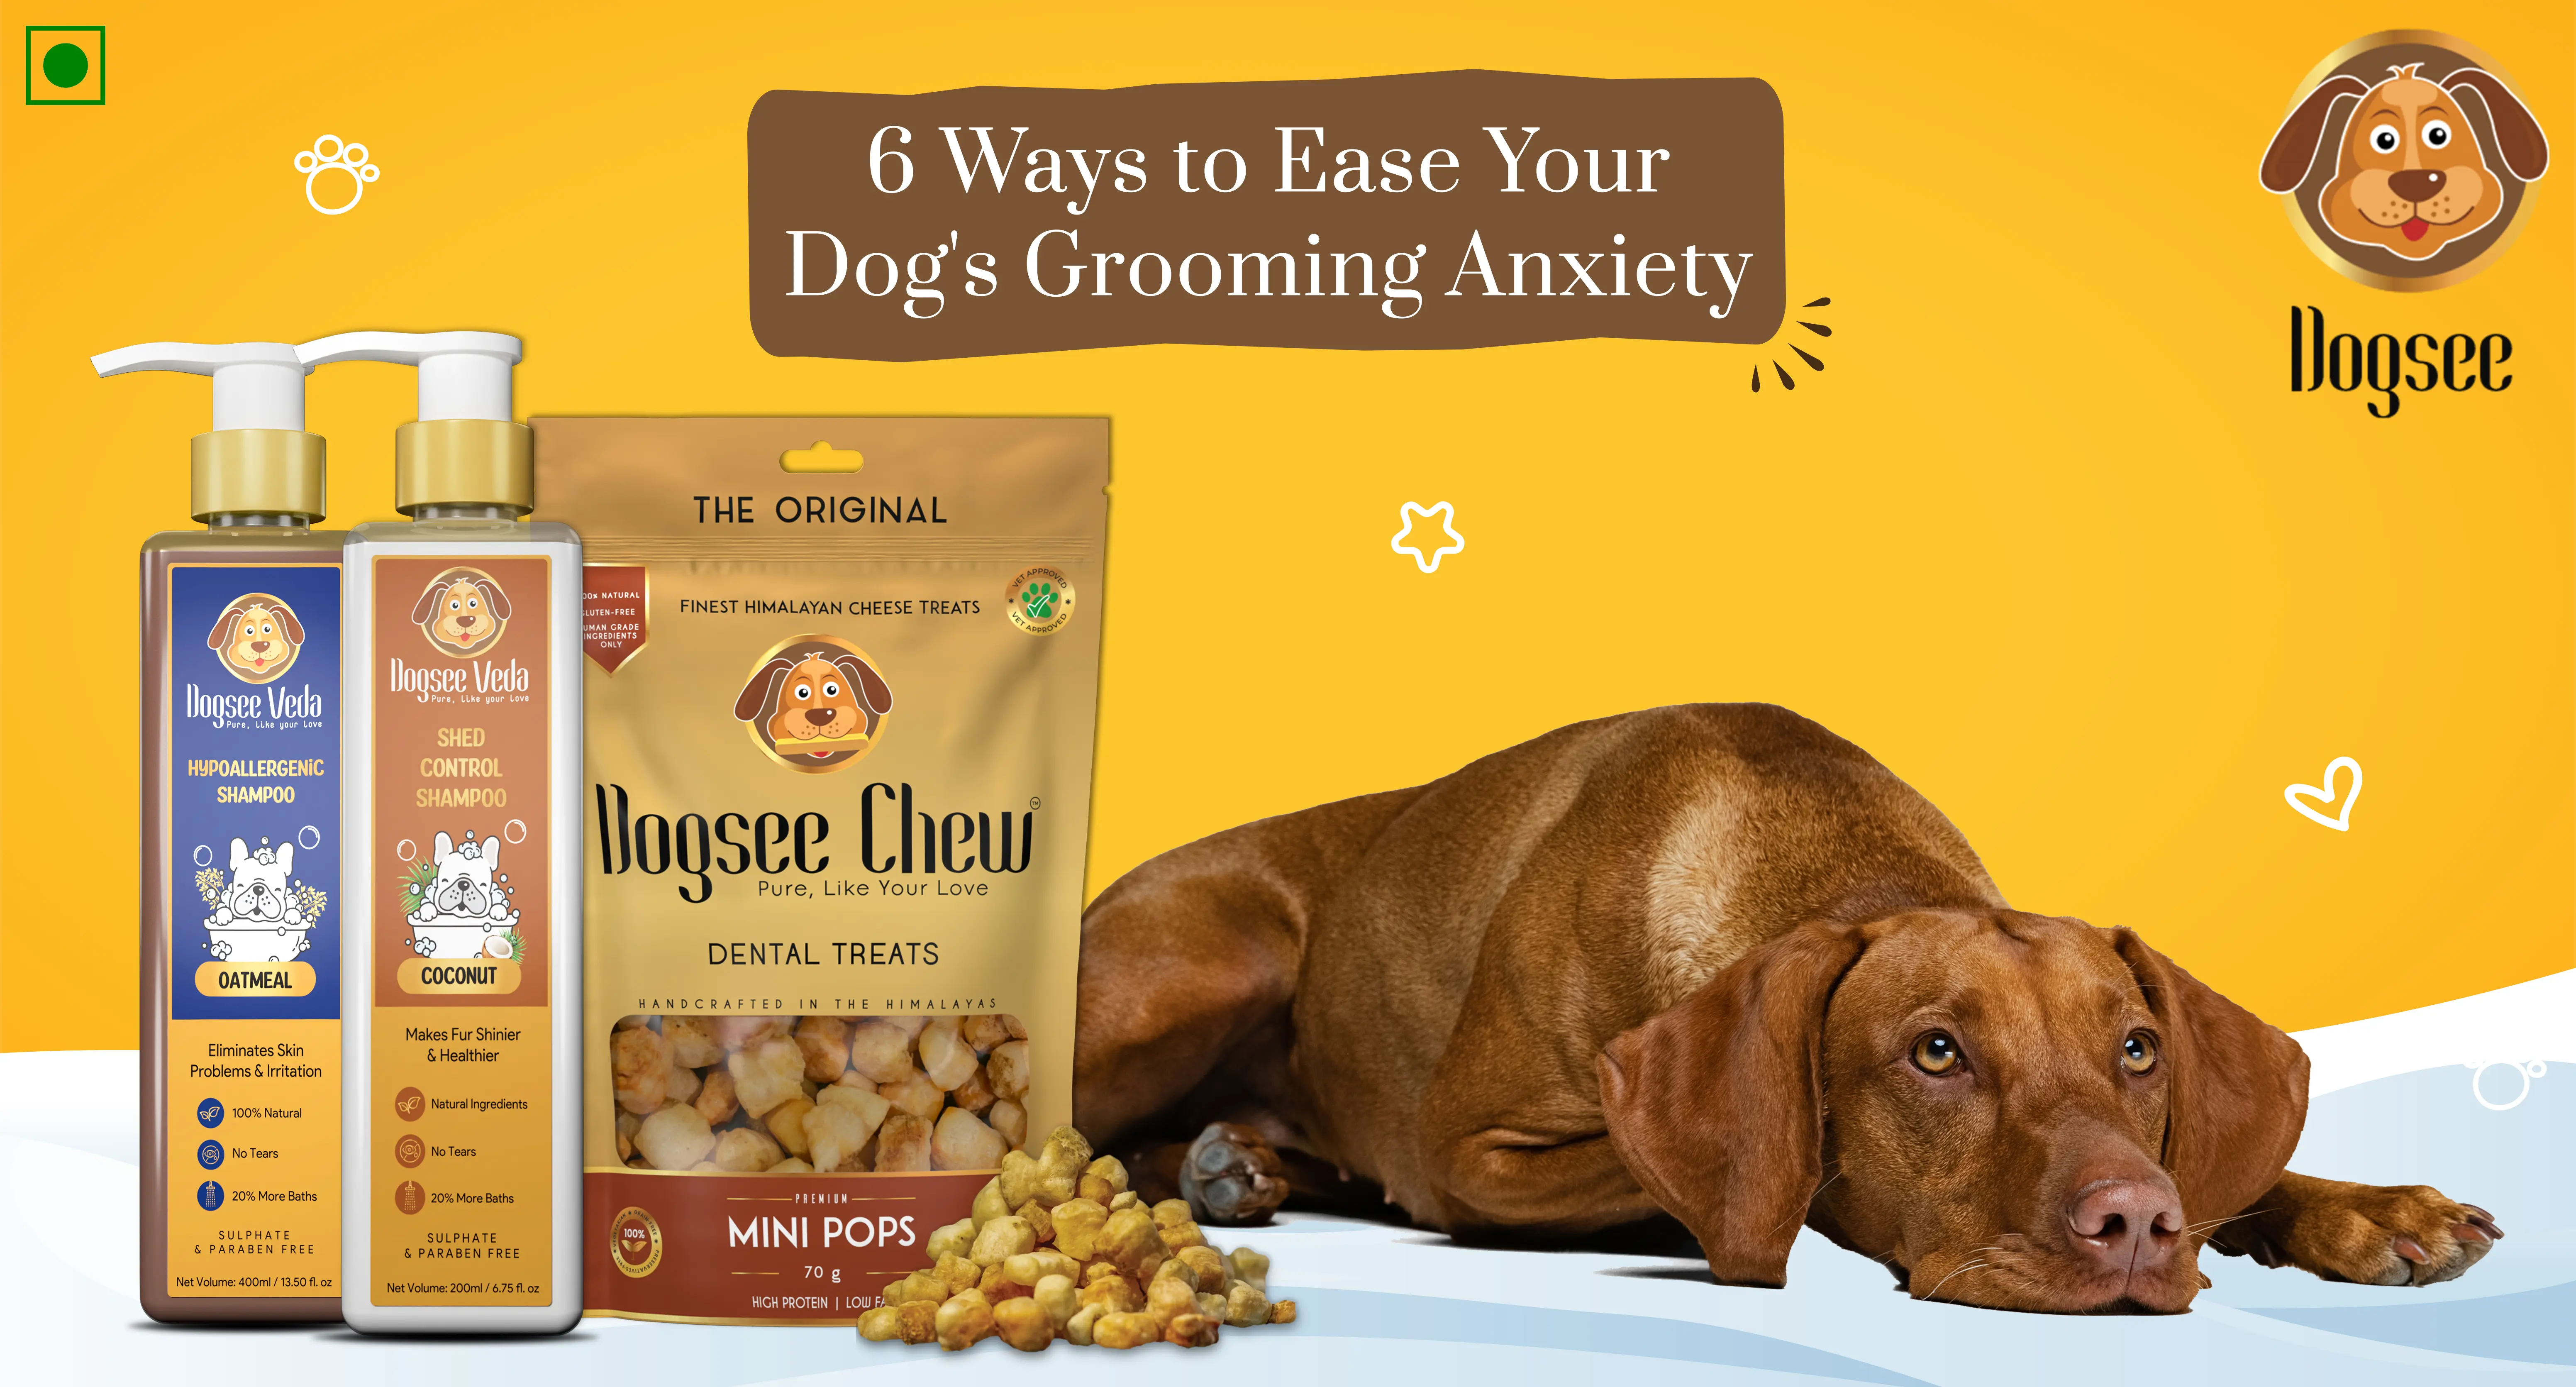 6 Ways to Ease Your Dog's Grooming Anxiety